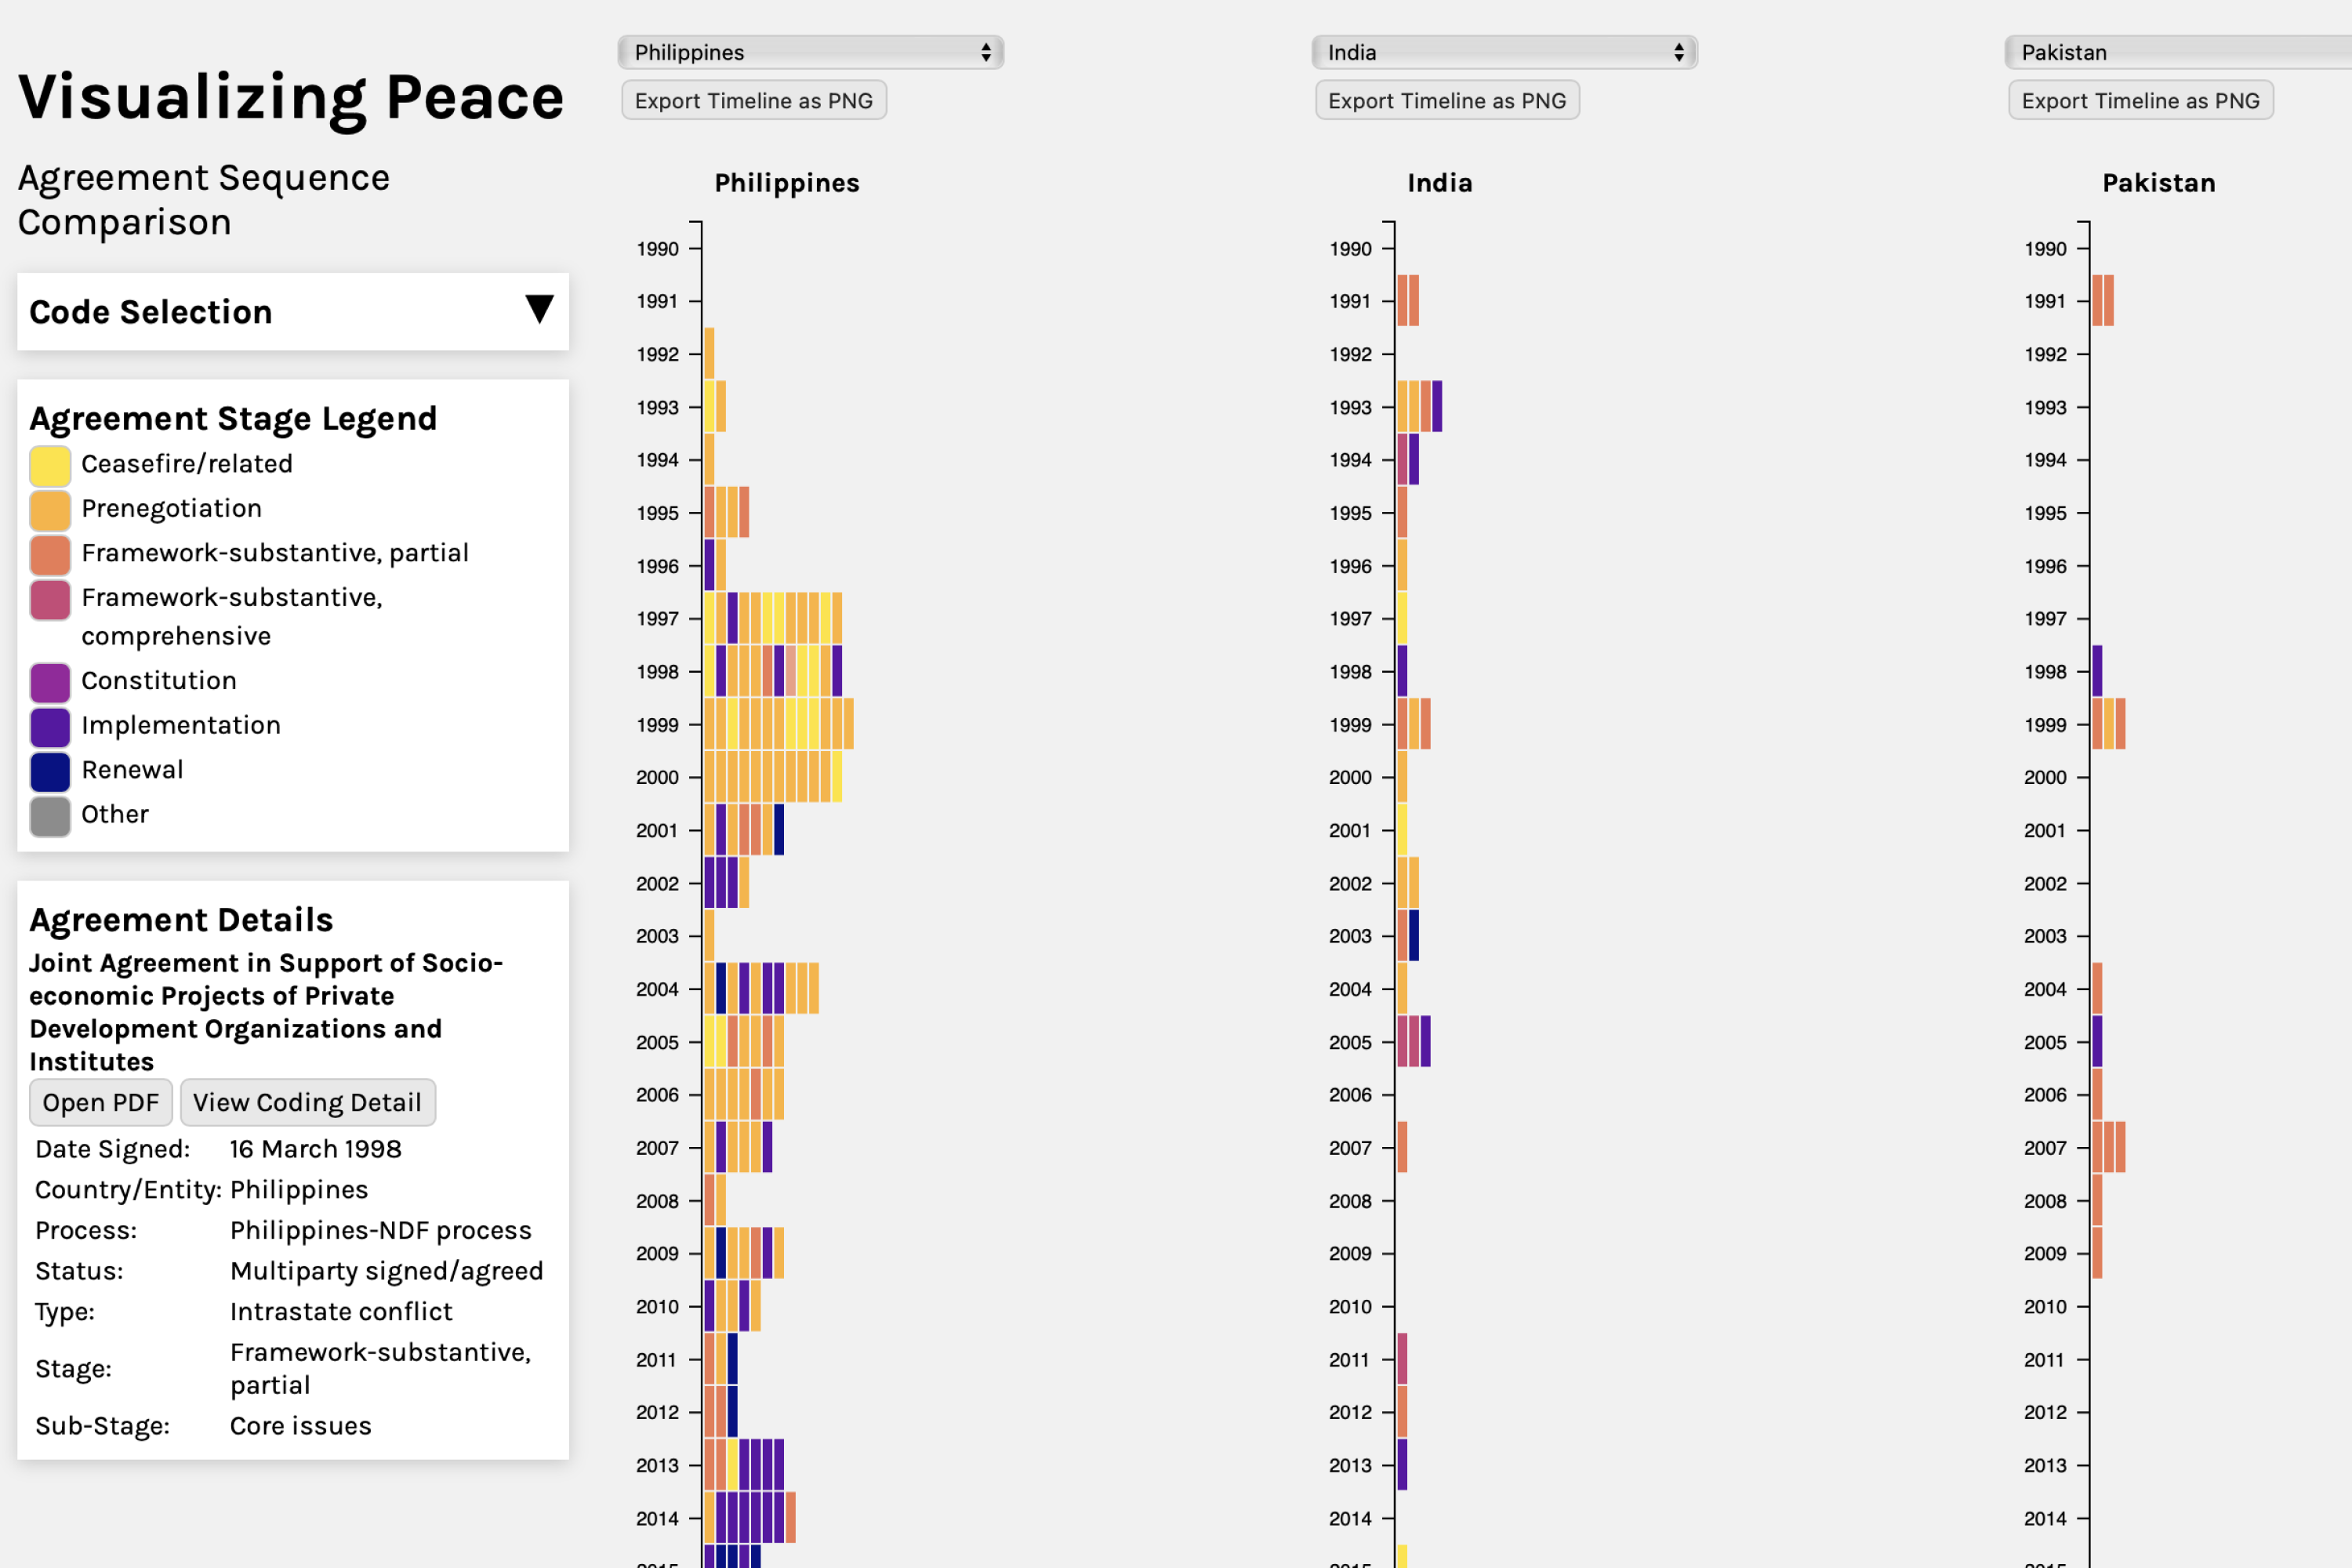 7. Peace Agreement Sequence Comparison across Countries